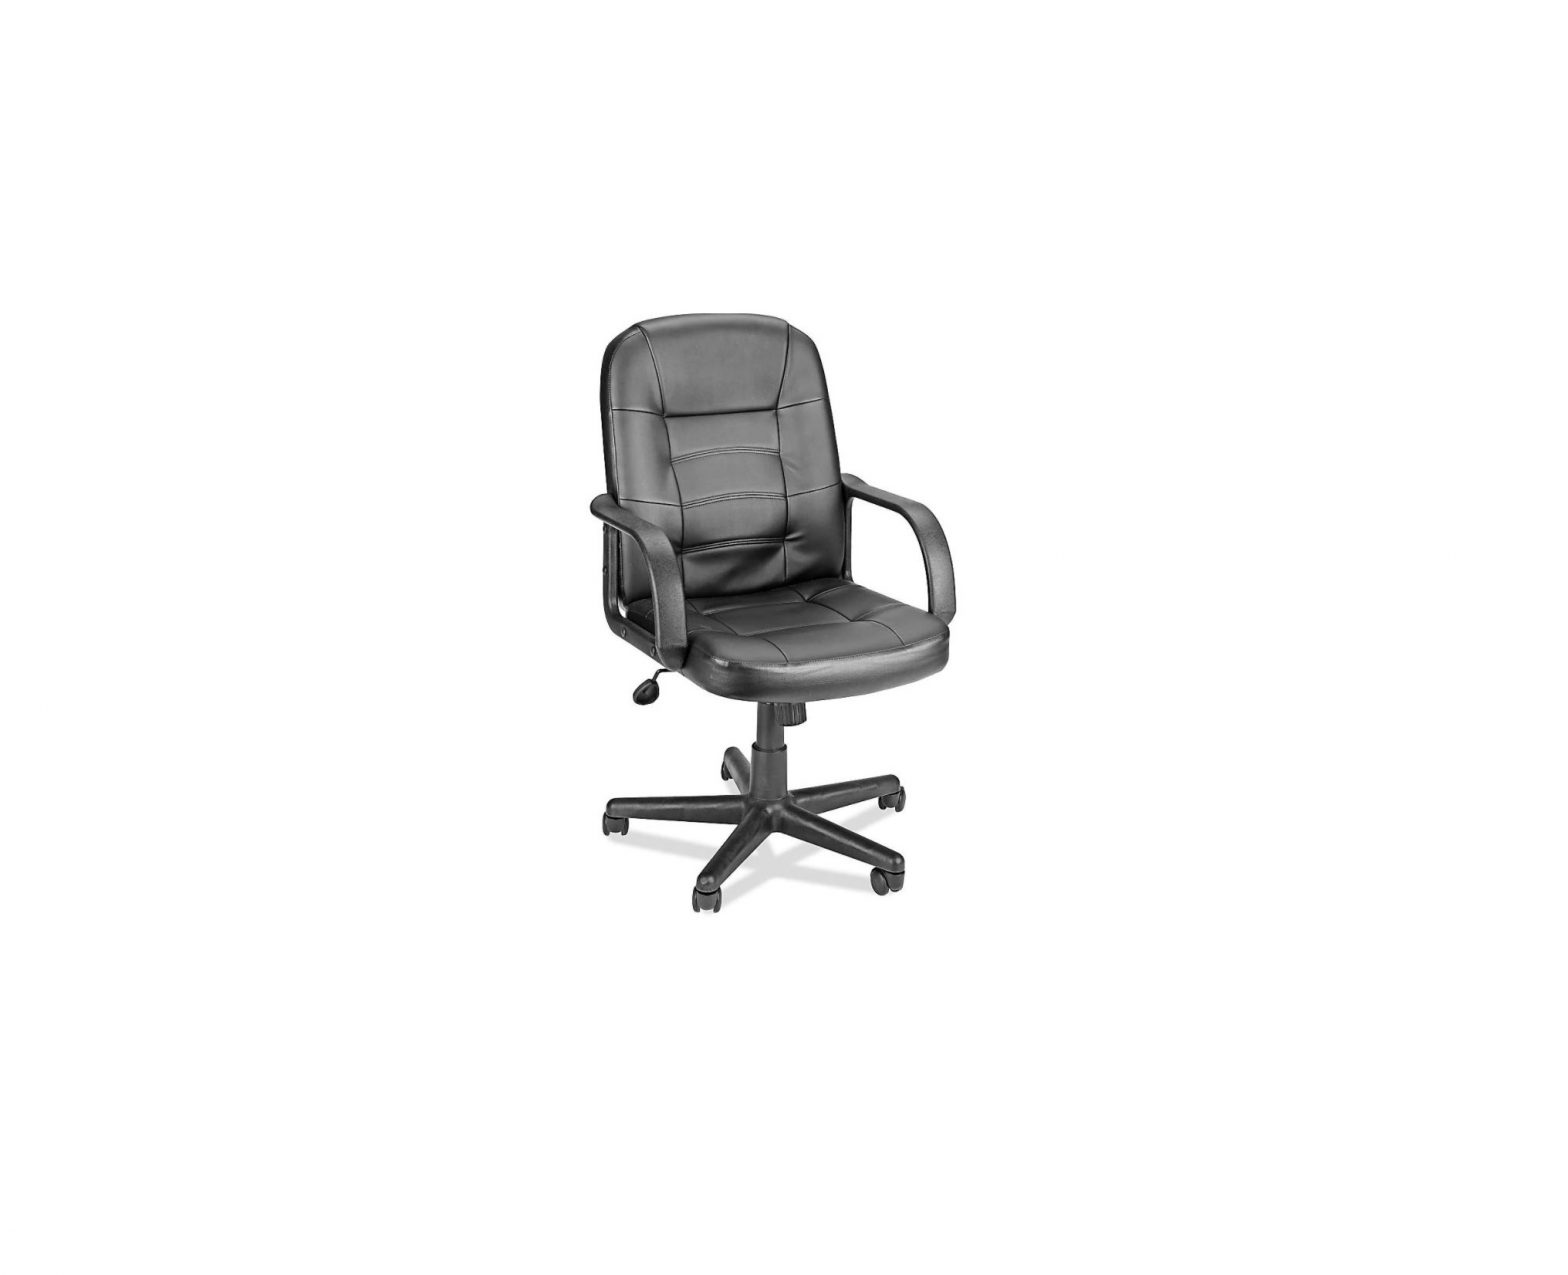 ULINE H-3641 Leather Manager’s Chair Installation Guide